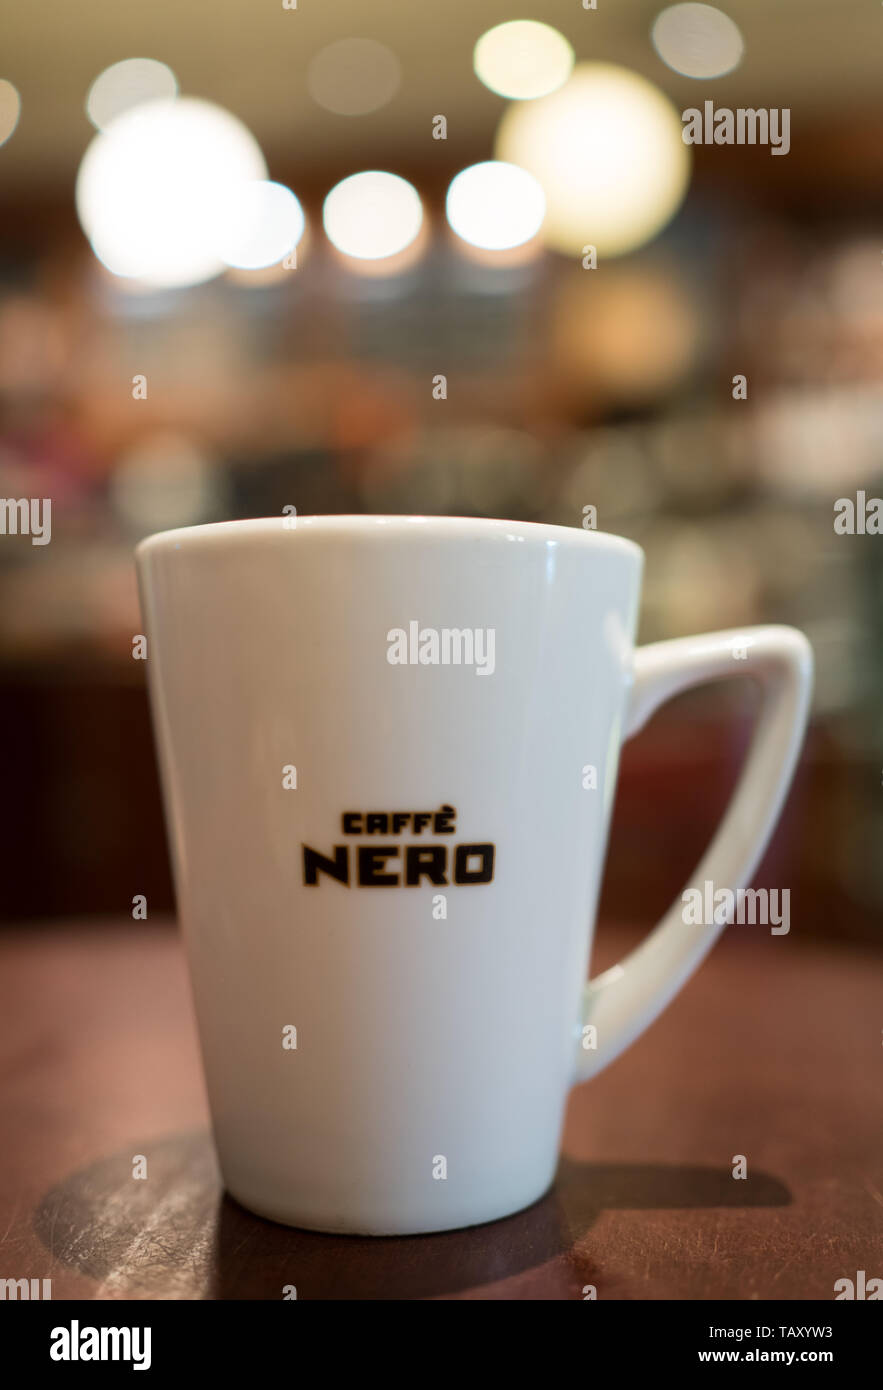 Mug of cappuccino at Caffe Nero in Waterstones Bournemouth with bokeh Stock Photo